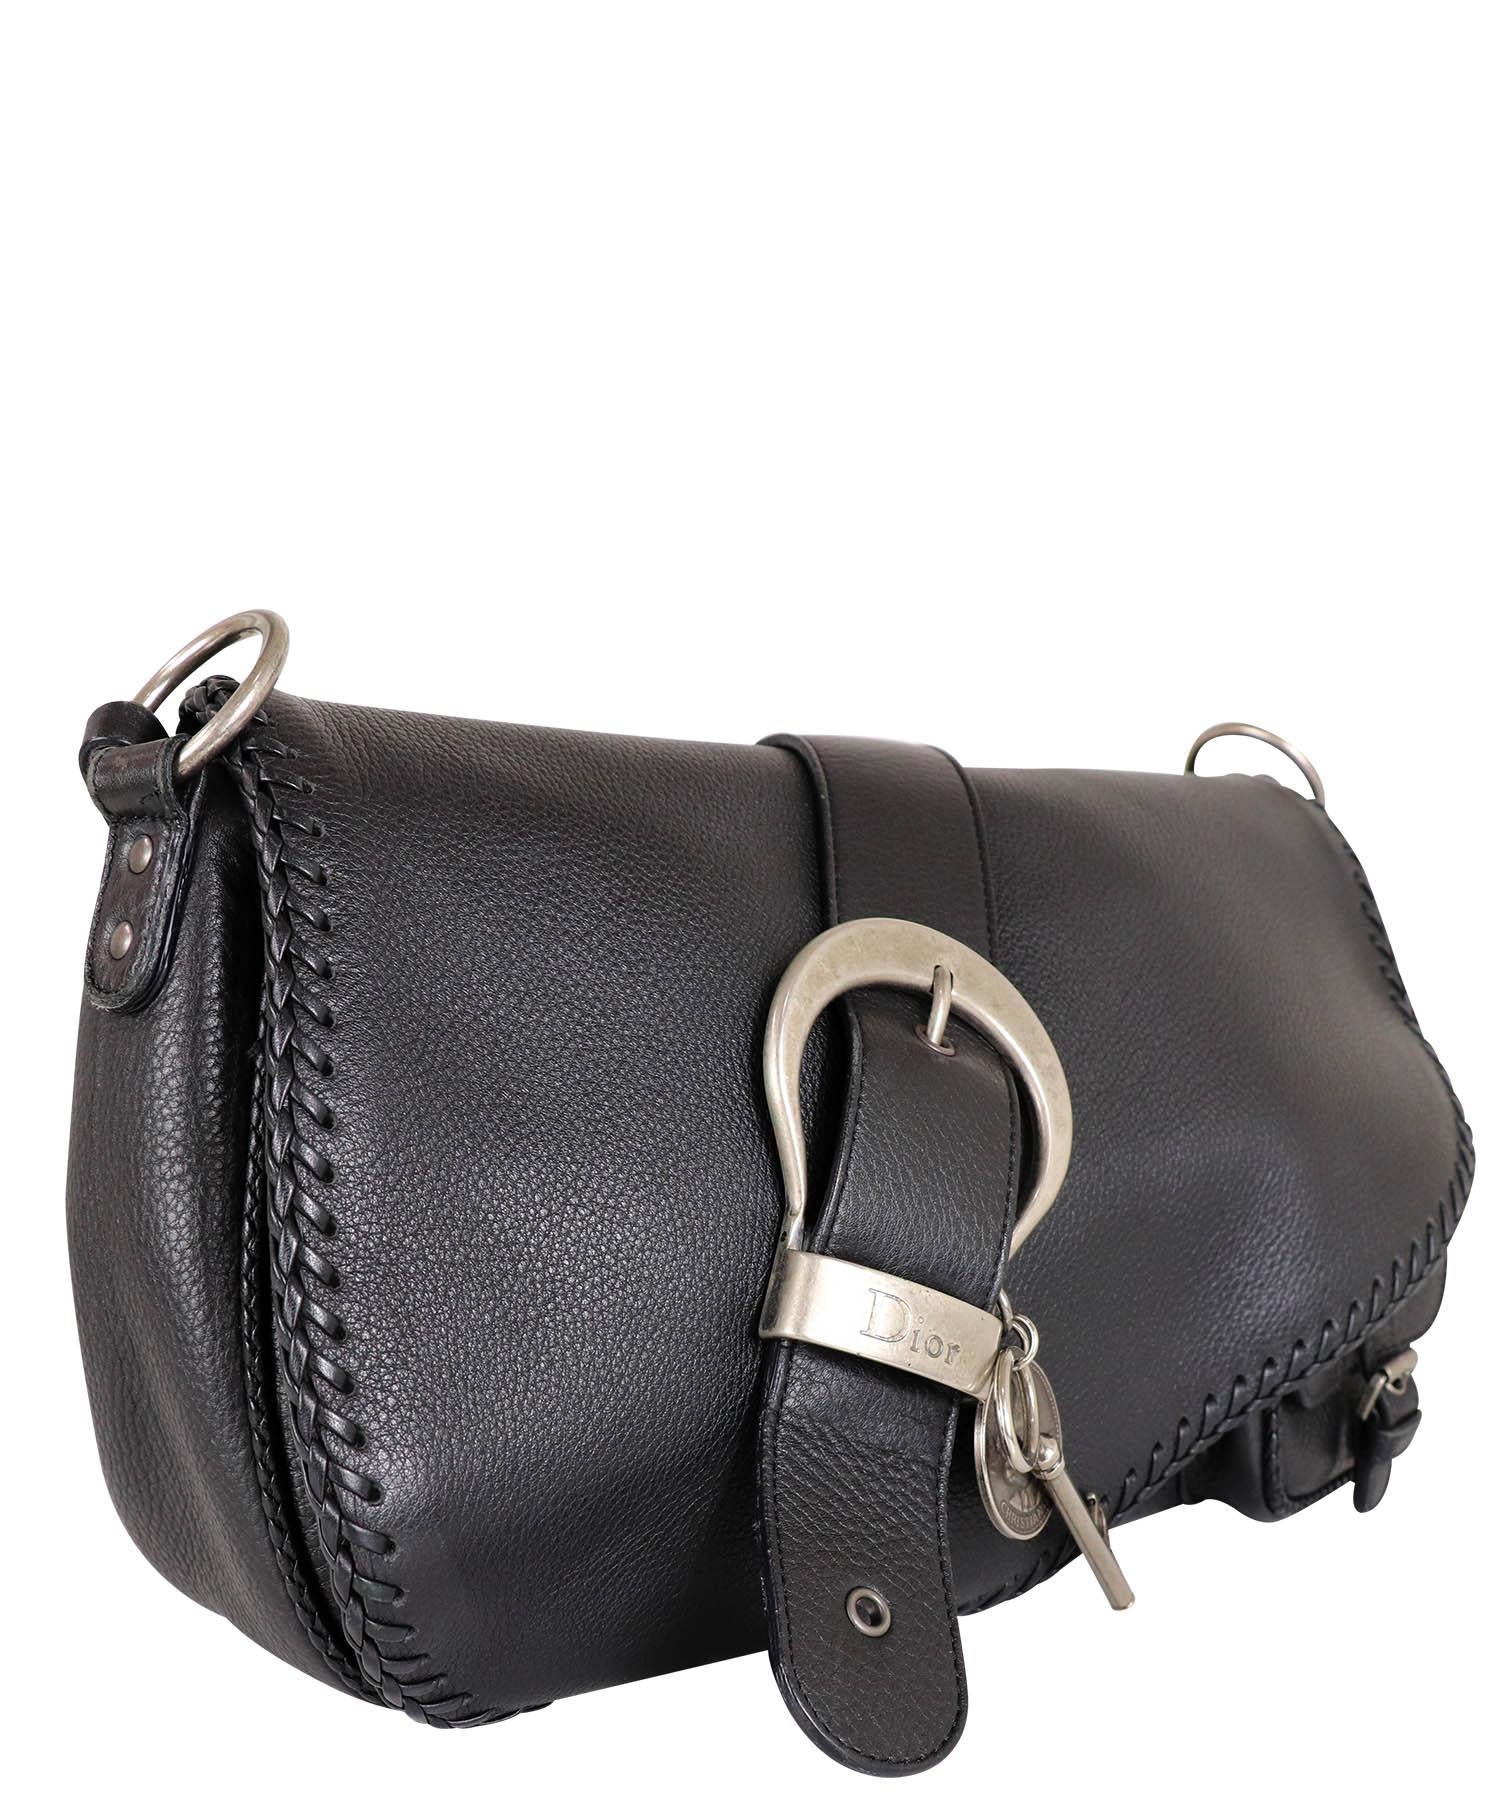 Christian Dior black calfskin leather double saddle whipstitched rare style gaucho bag from 2006. Bag has an asymmetrical front saddle flap with a magnetic closure, aged ruthenium hardware accents, a large Dior key and coin charm at the front with a